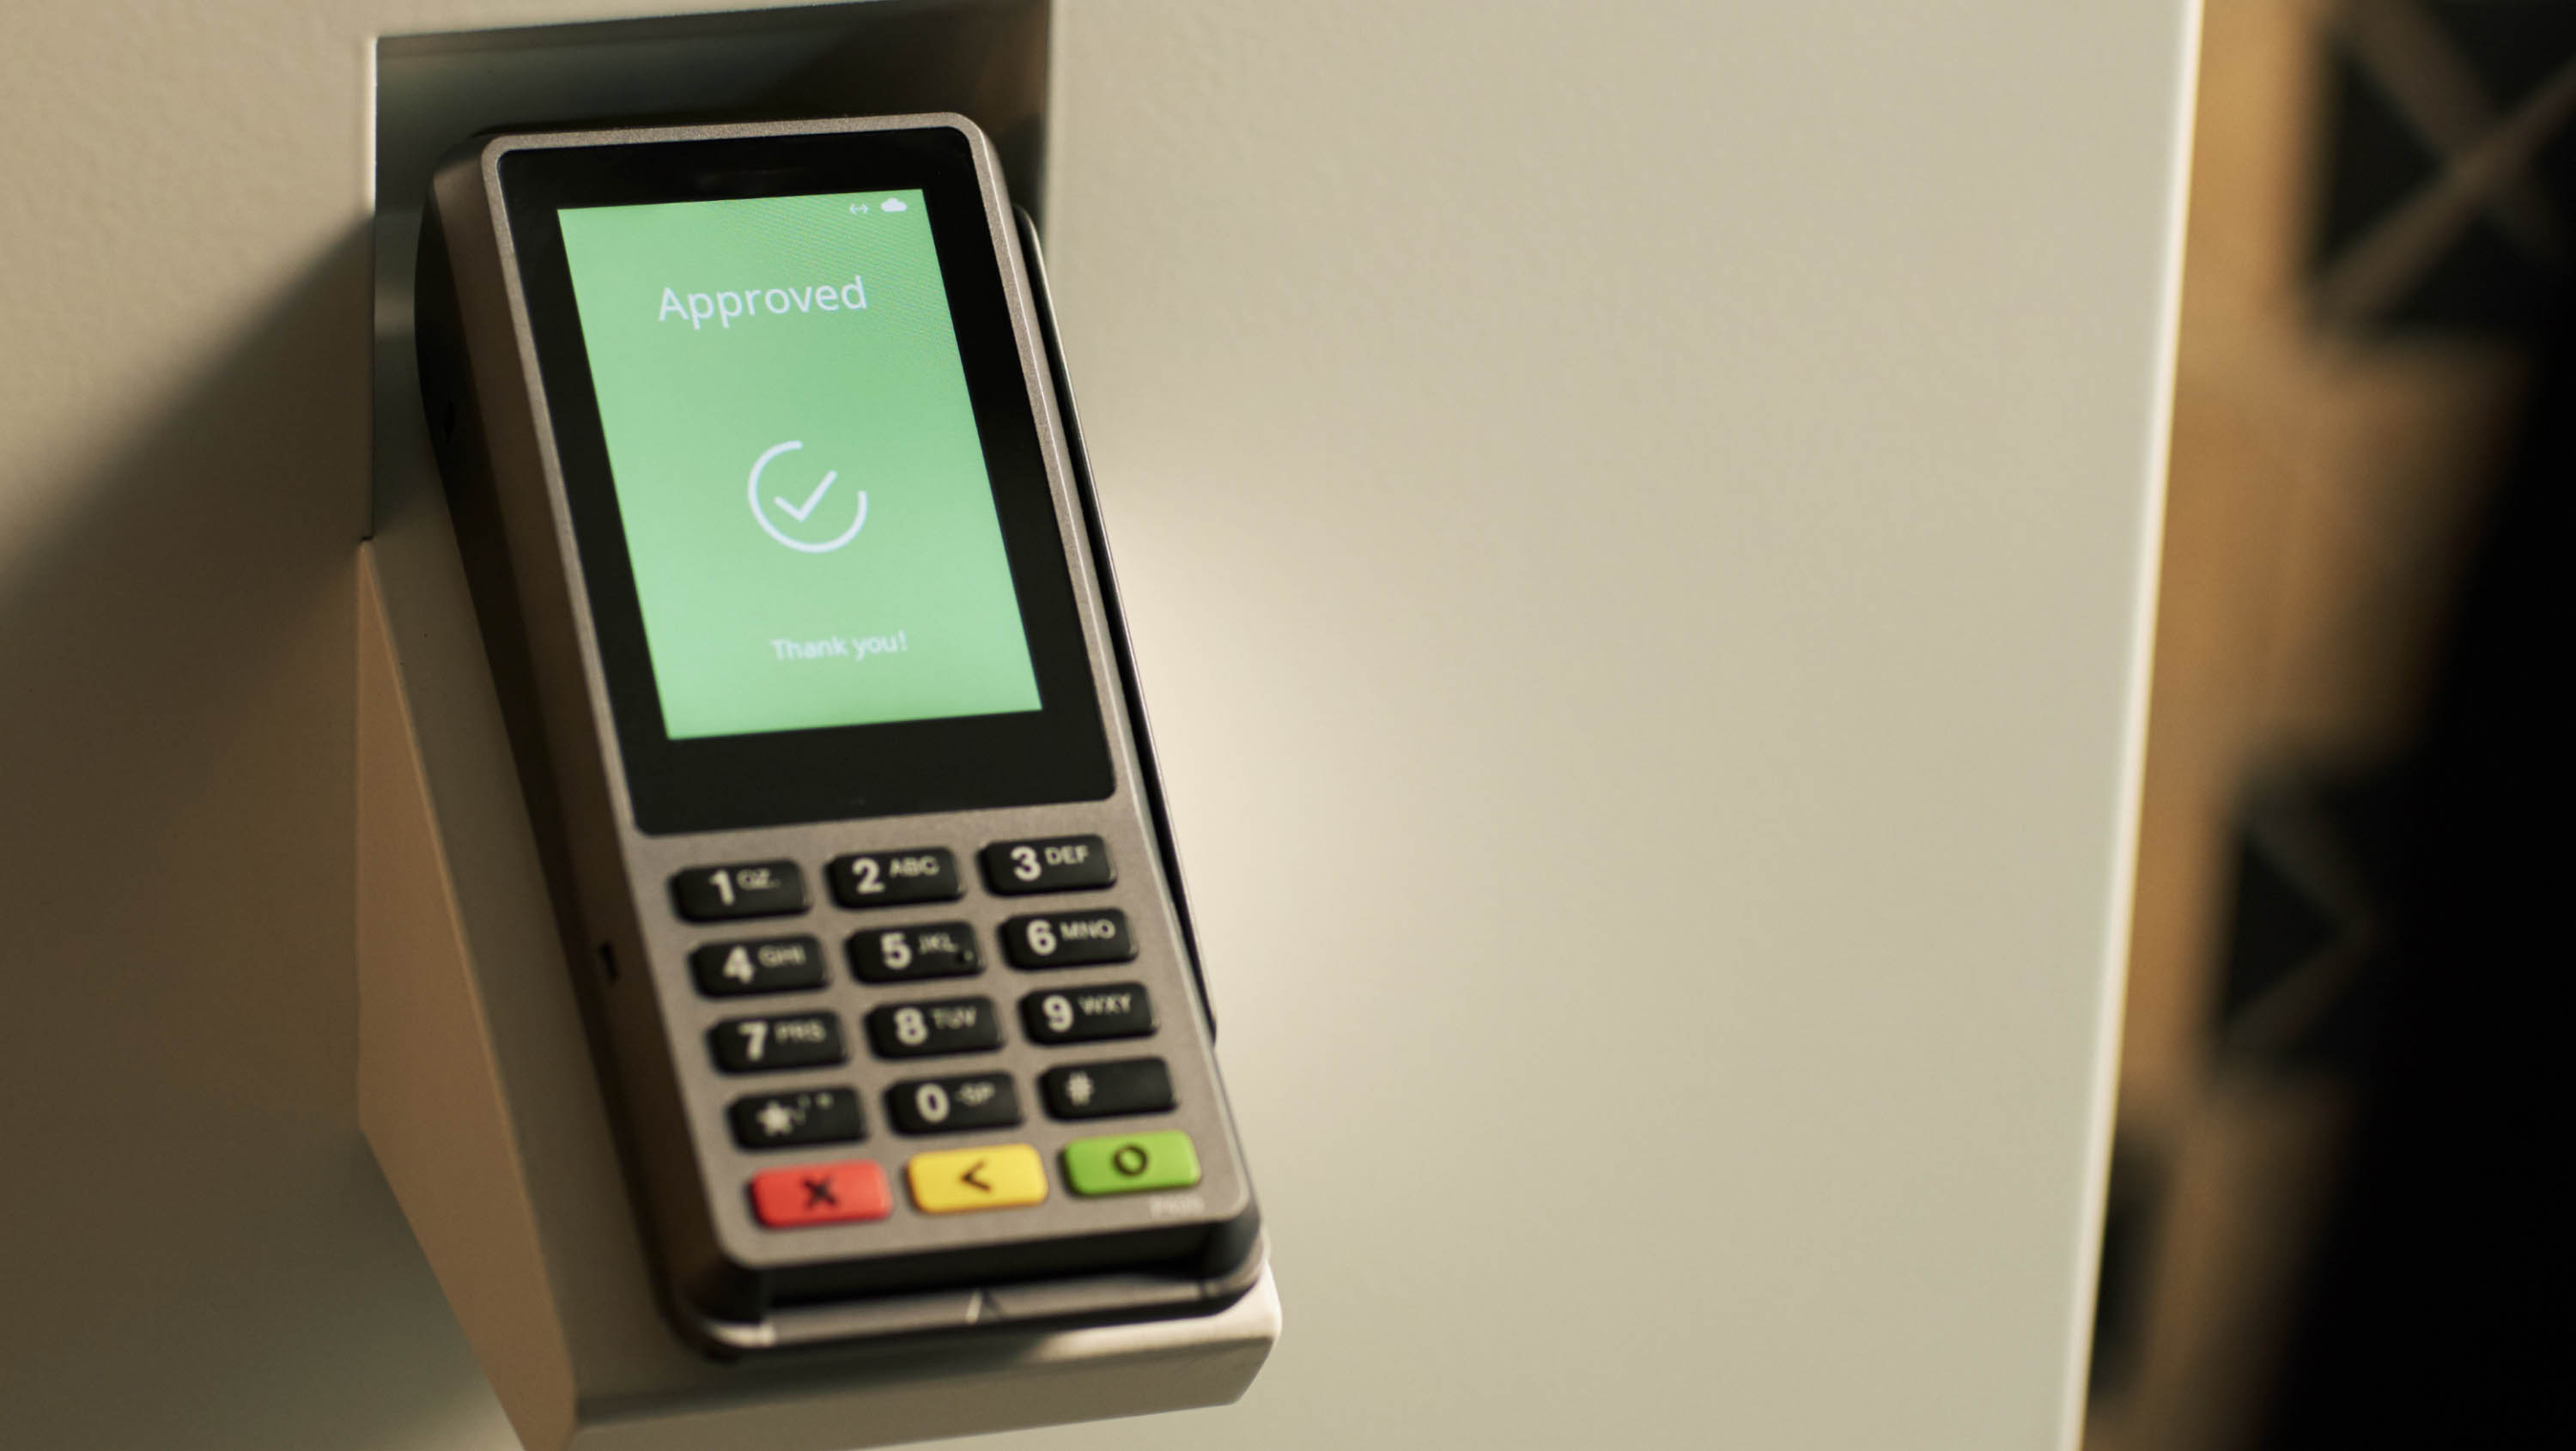 Adyen supports Dutch businesses bringing Apple Pay to their customers in the Netherlands